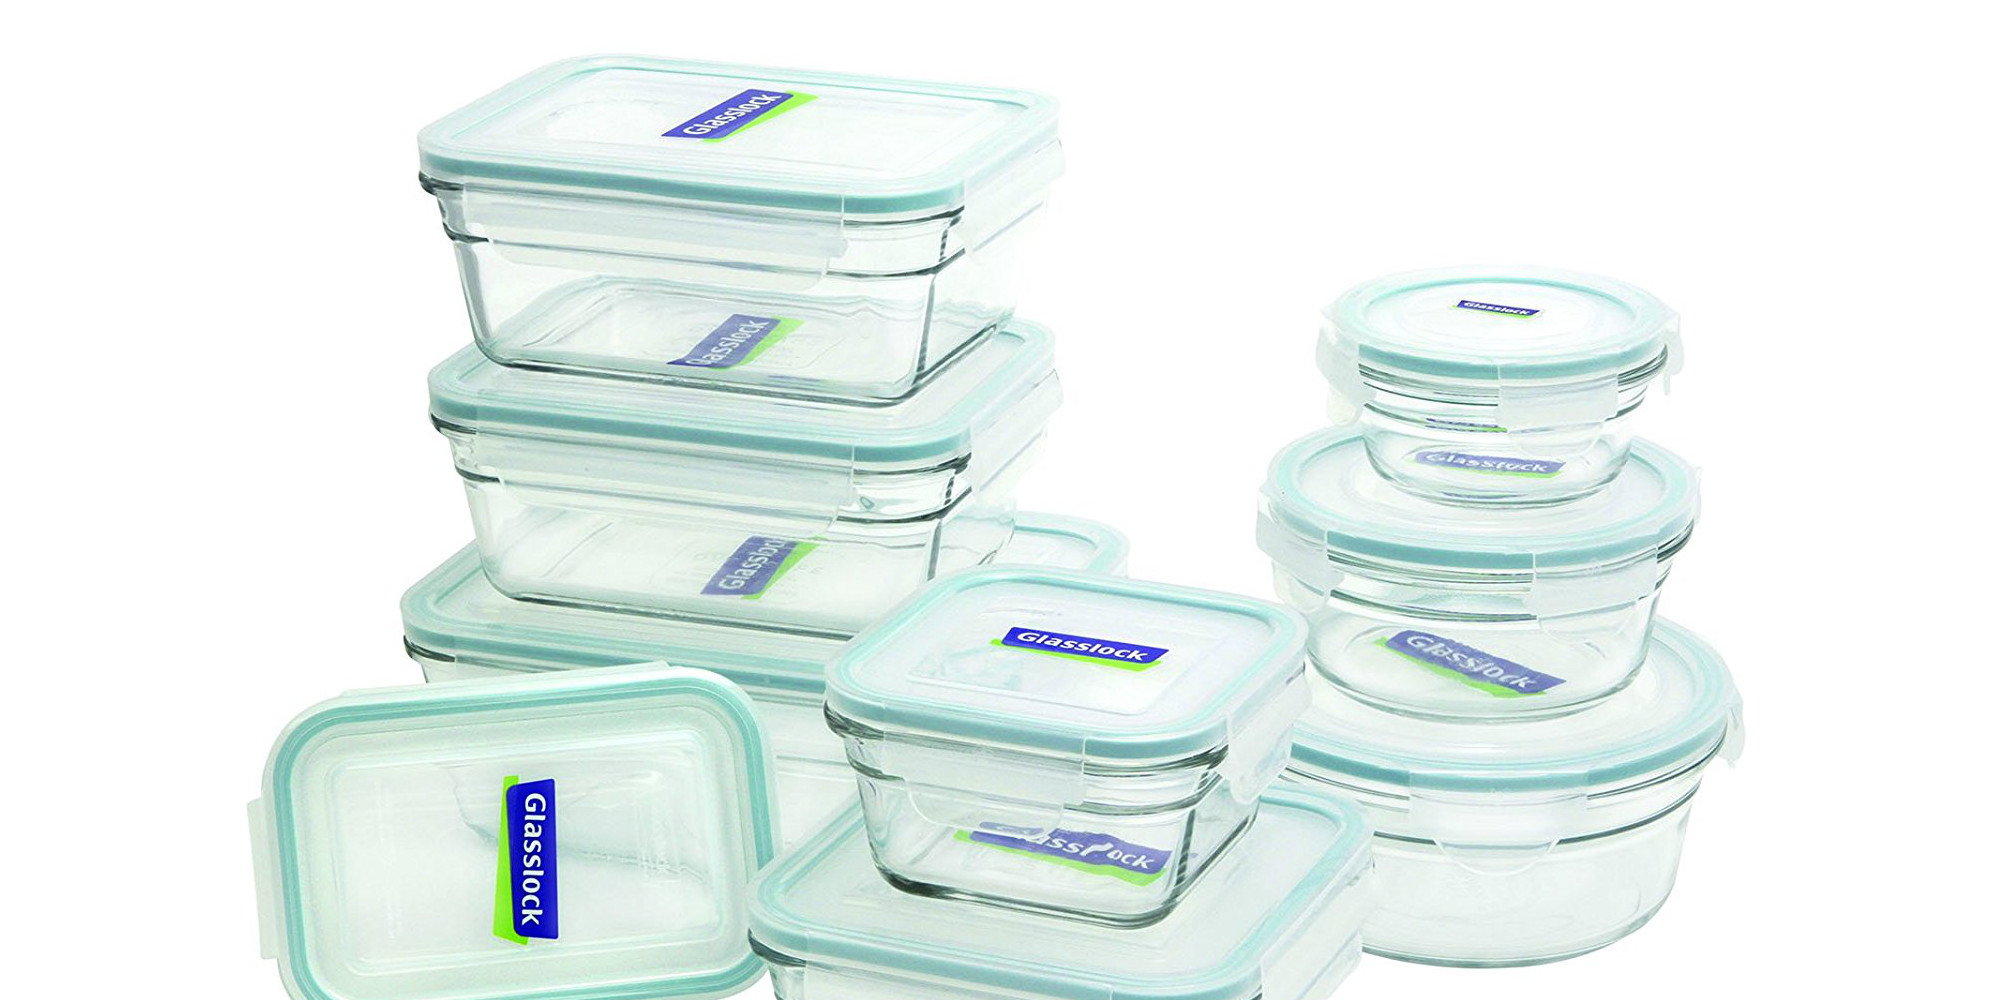 https://9to5toys.com/wp-content/uploads/sites/5/2017/10/glasslock-18-piece-assorted-oven-safe-container-set.jpg